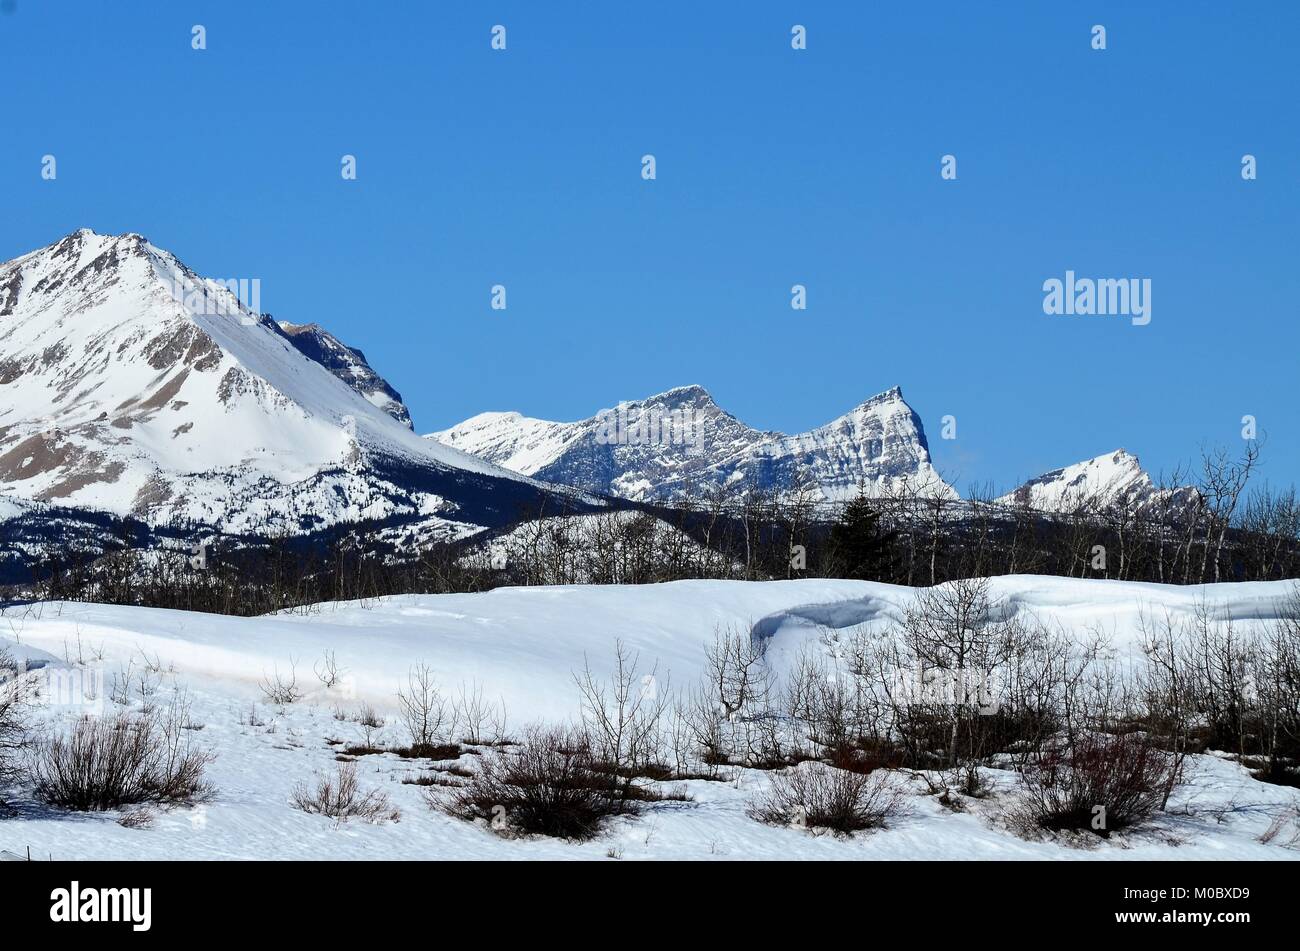 A wonderful winter scene with snow covered mountains in the background Stock Photo